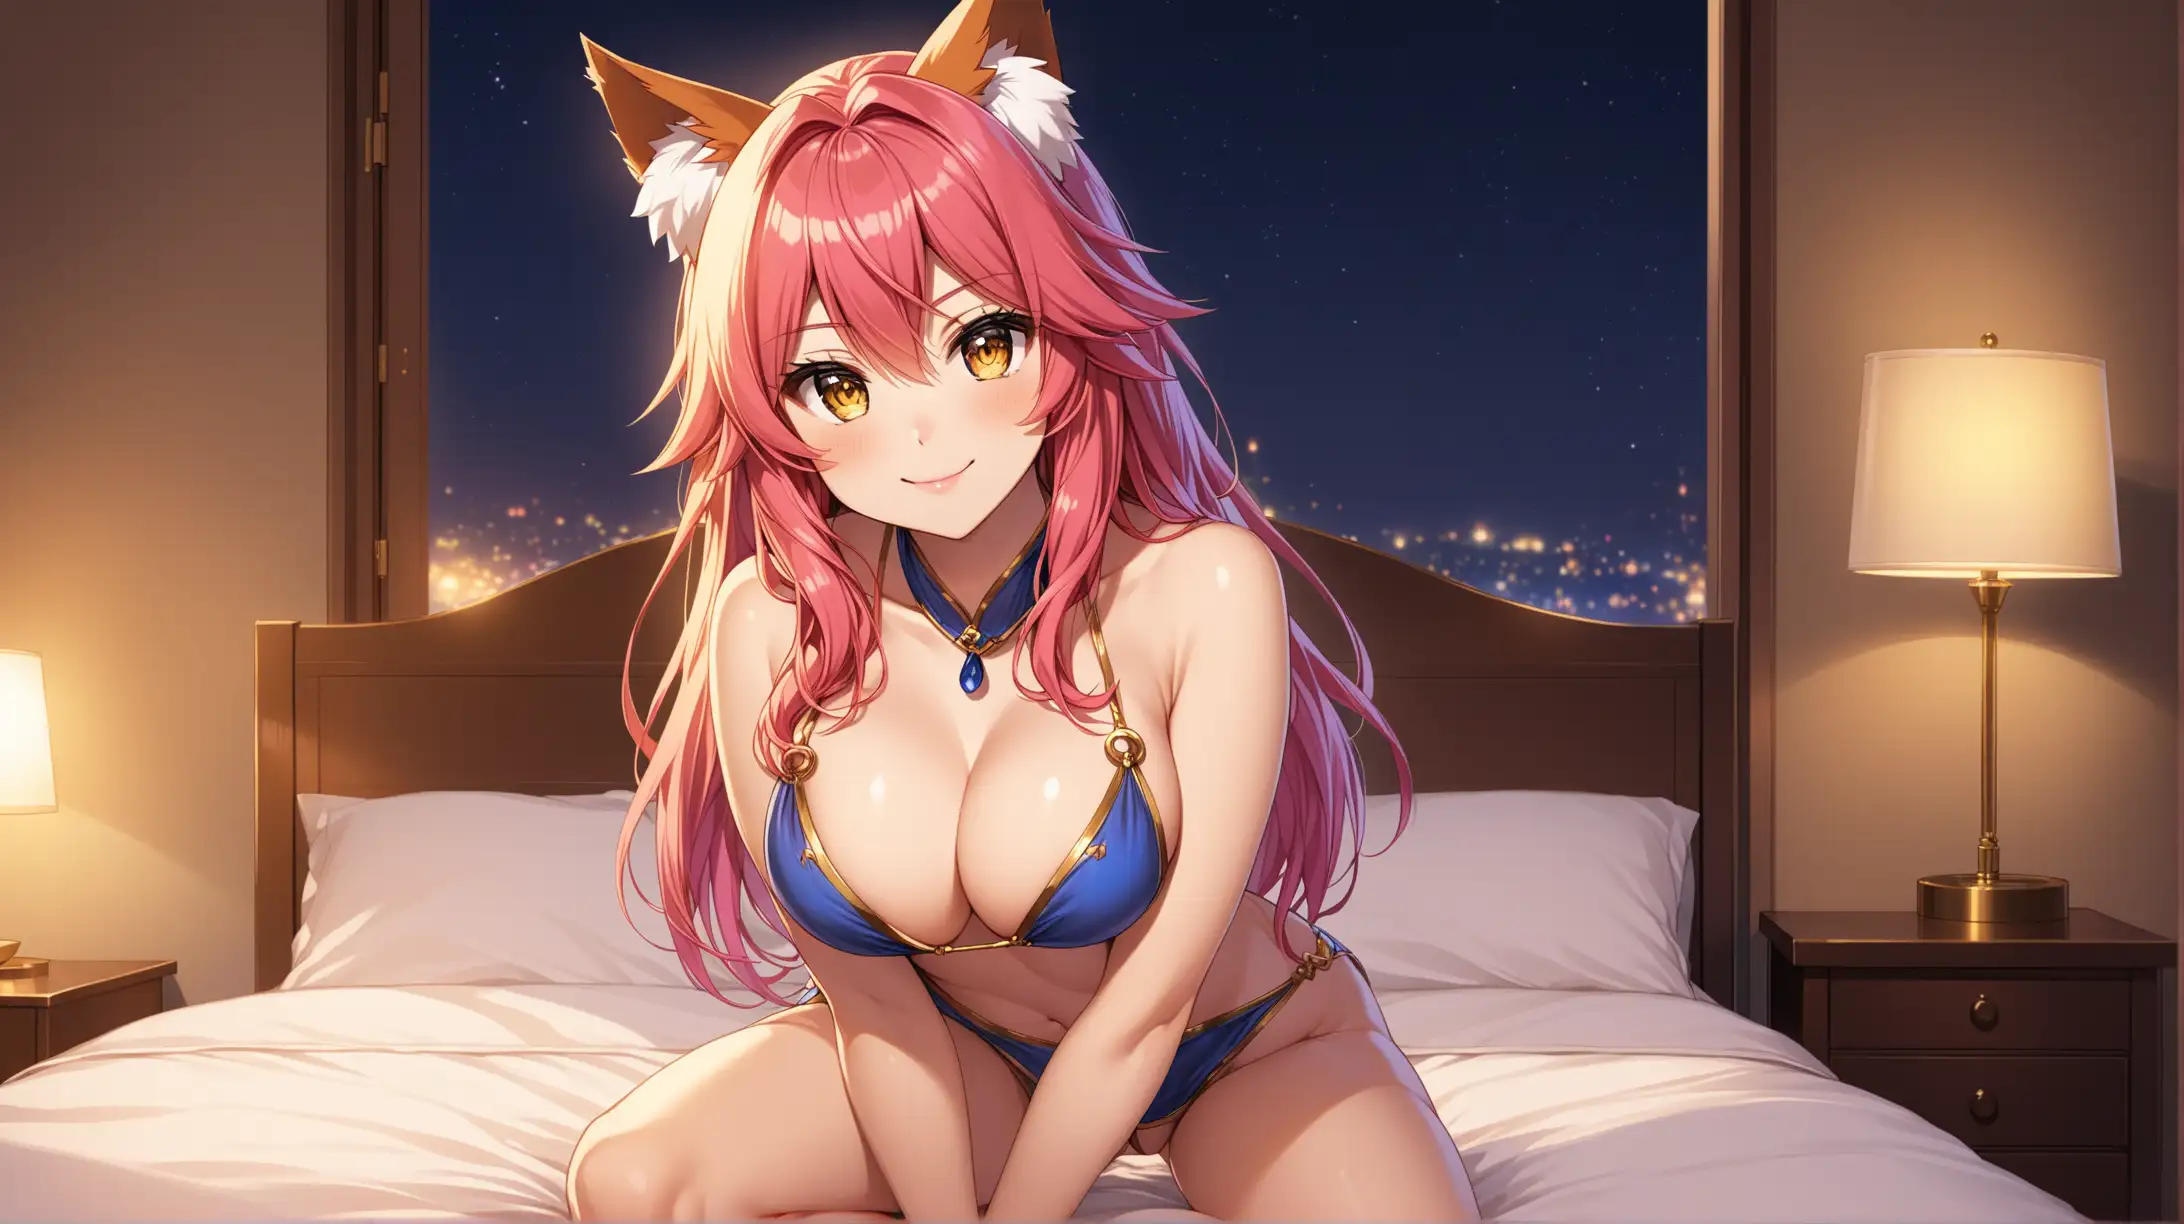 Draw the character Tamamo no Mae, pink hair, gold eyes, high quality, dim lighting, long shot, indoors, bedroom, seductive pose, wearing colorful revealing clothing, smiling